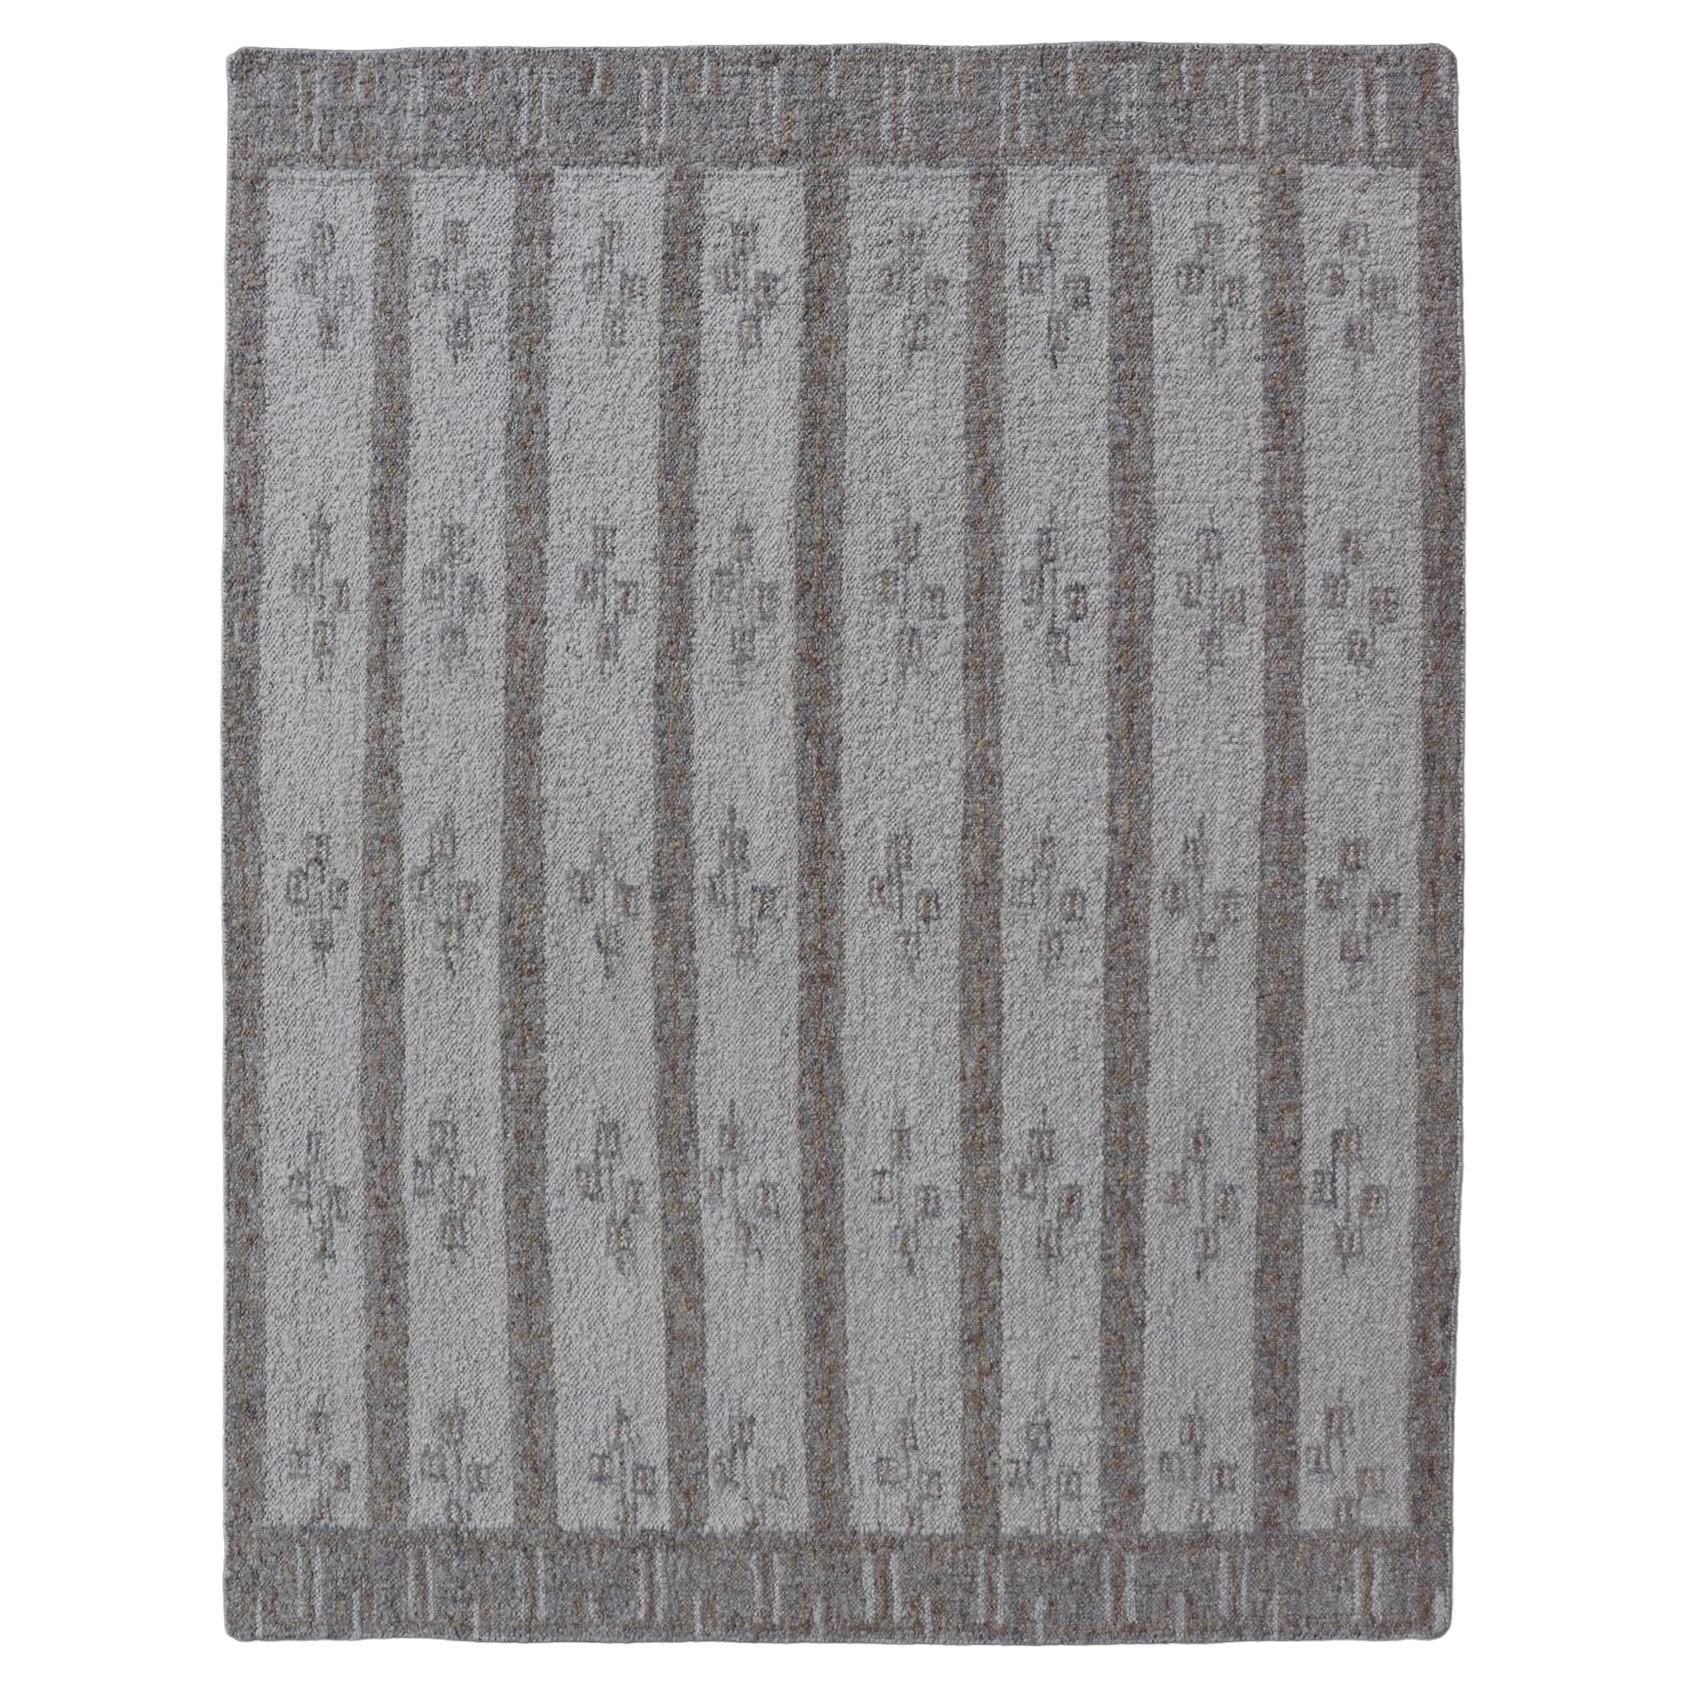 Scandinavian Inspired Design Rug Hand Woven in Light Blue, Tan and Gray Colors